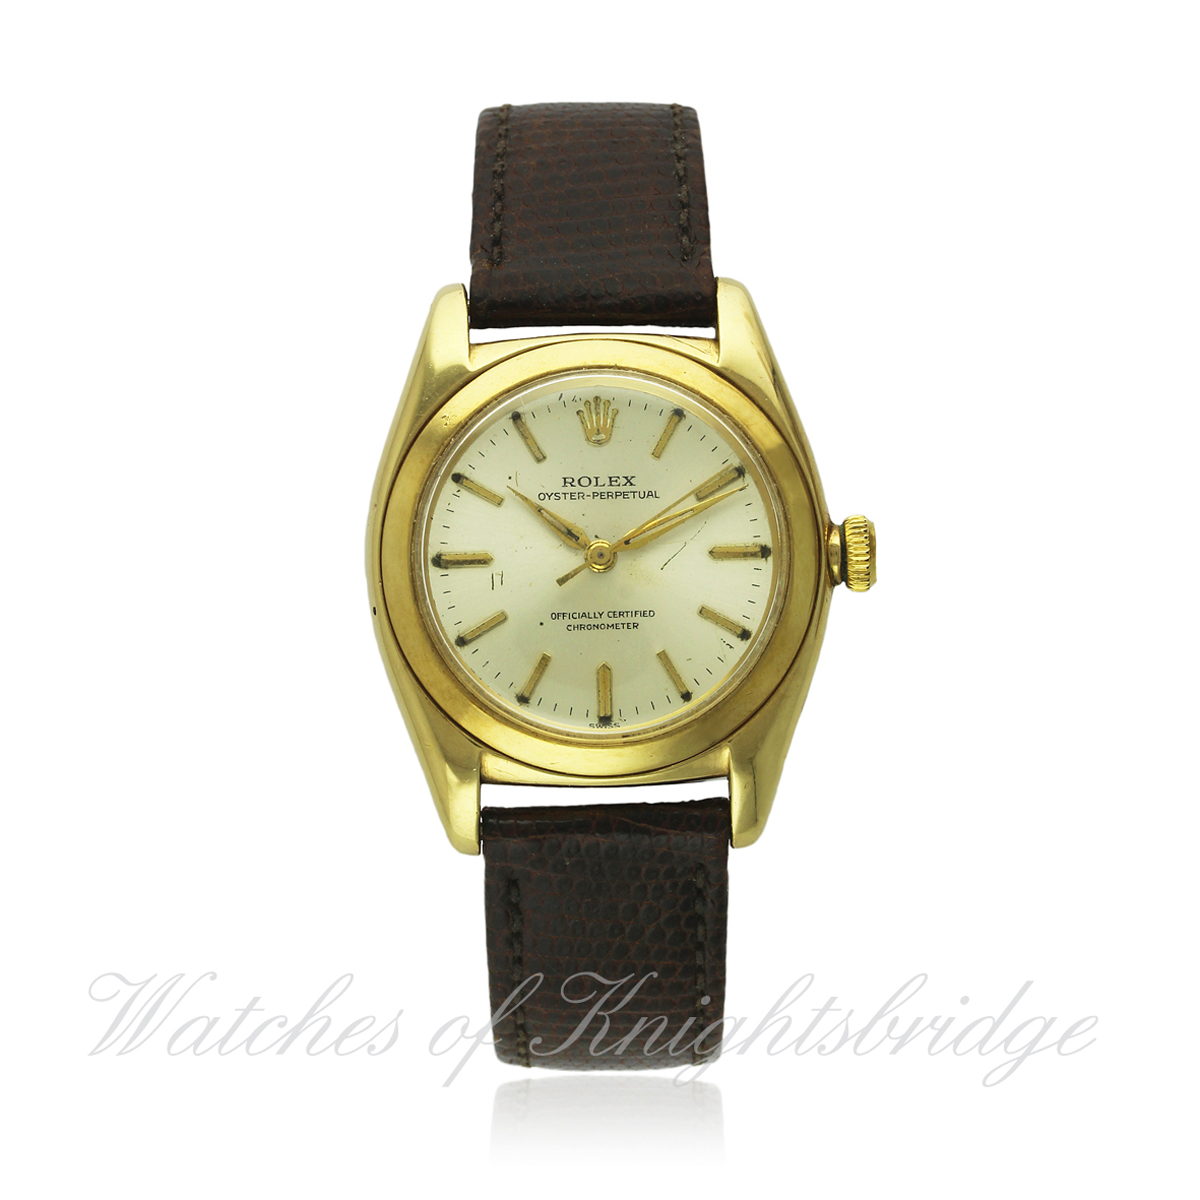 A GENTLEMAN`S 14K SOLID GOLD ROLEX OYSTER PERPETUAL "BUBBLE BACK" CHRONOMETER WRIST WATCH CIRCA